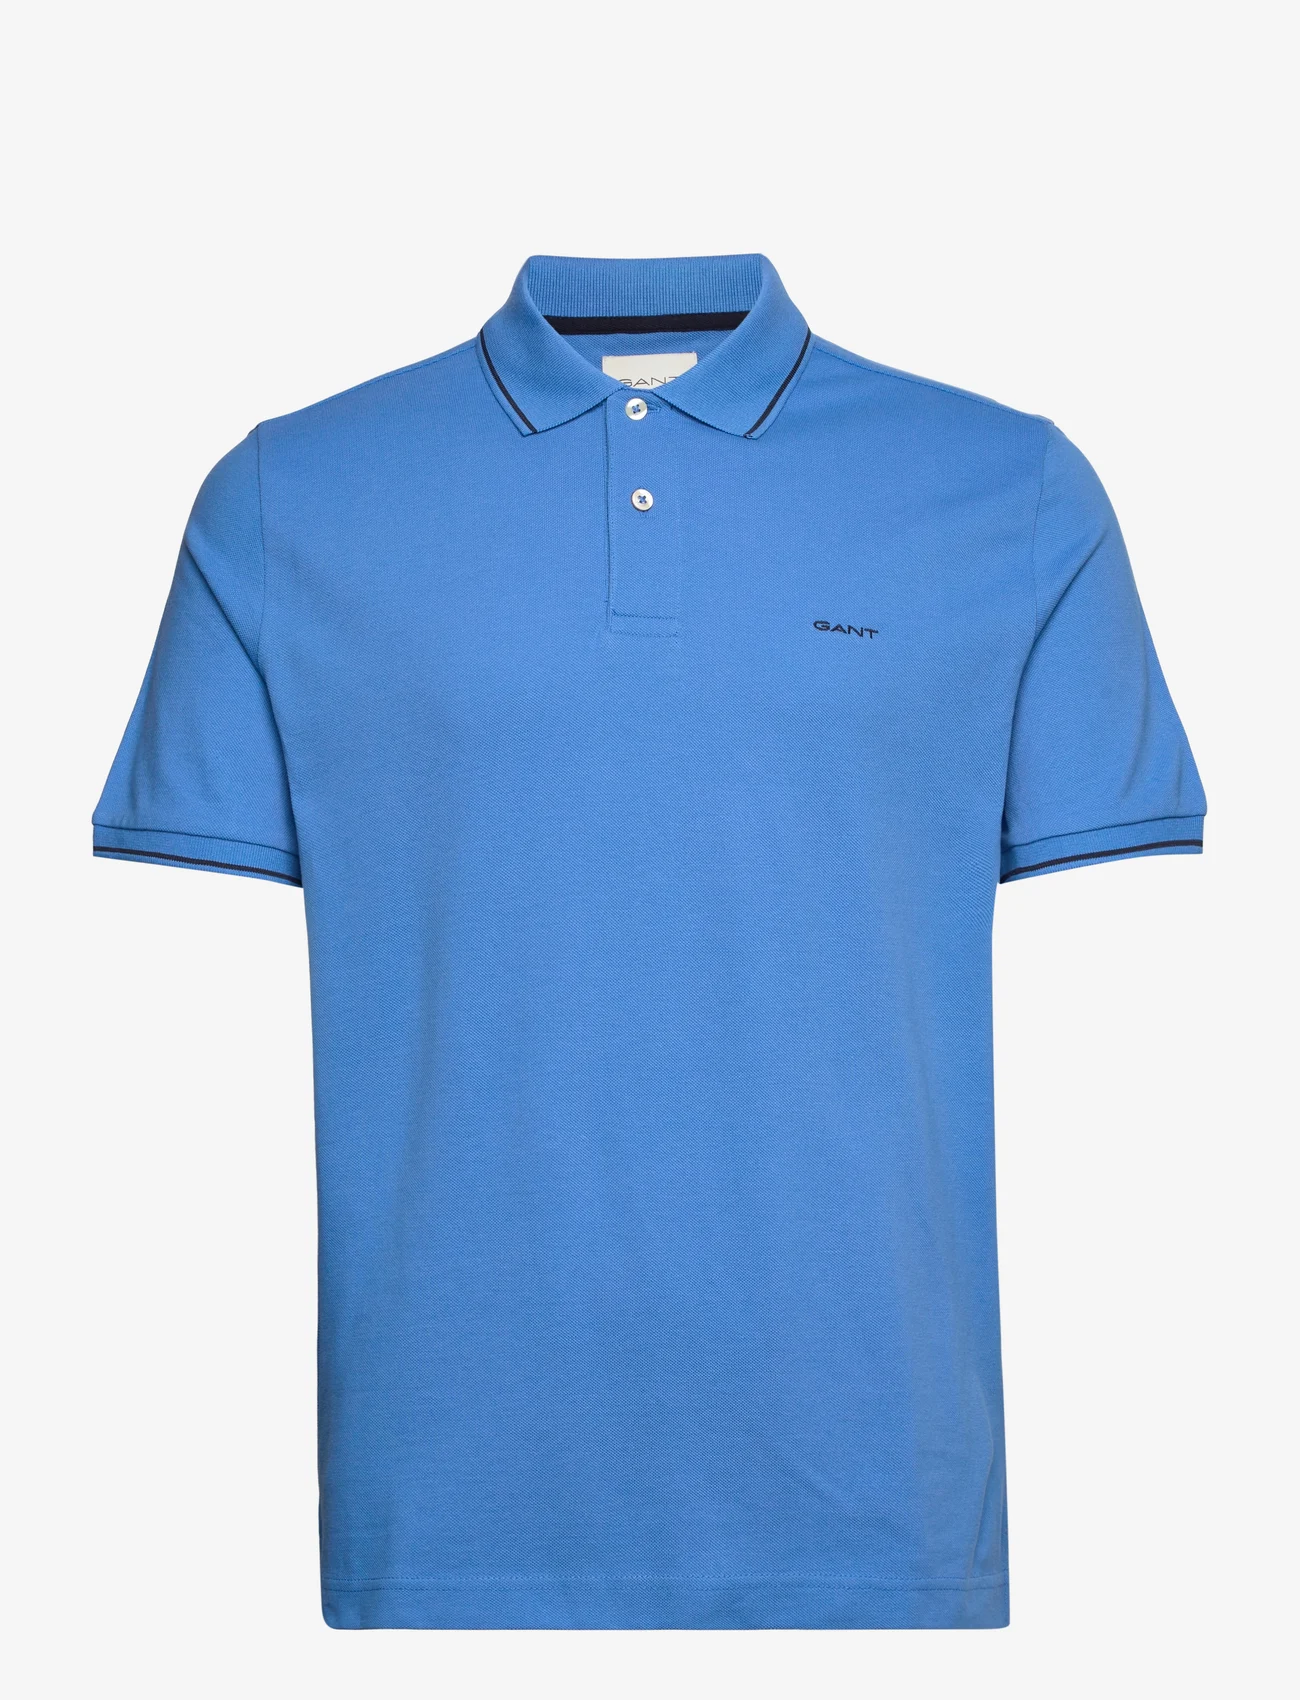 GANT - TIPPING SS PIQUE POLO - short-sleeved polos - day blue - 0